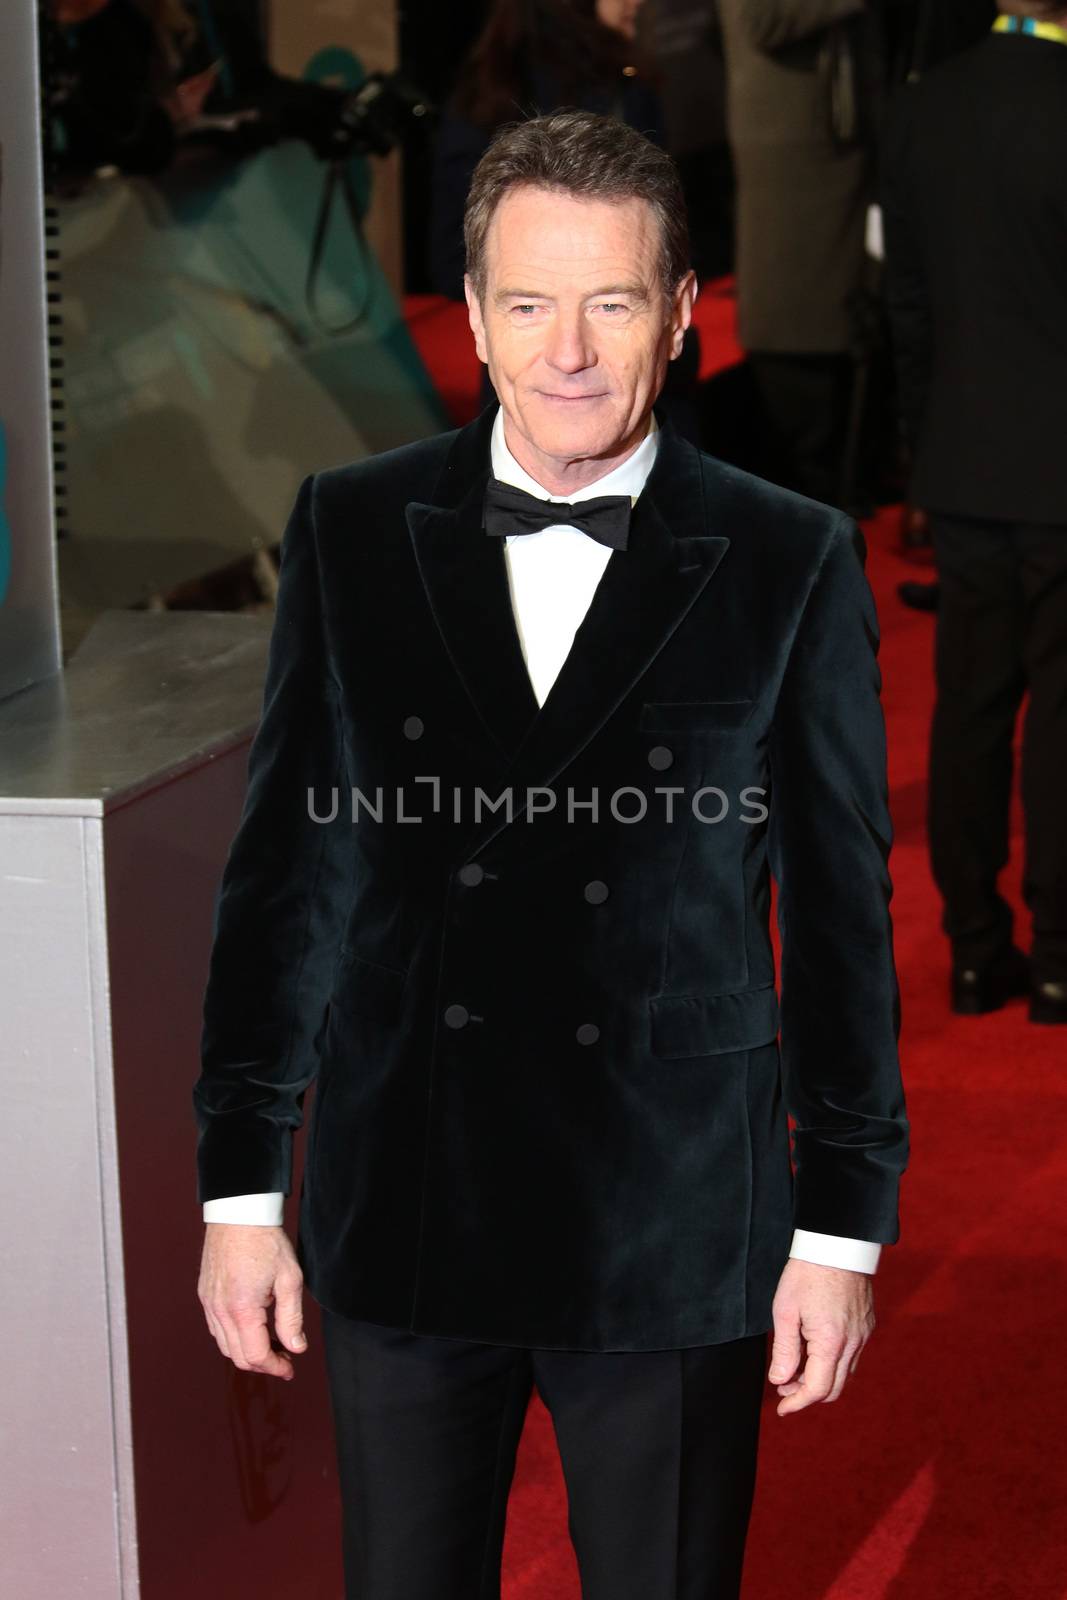 UK, London: American actor Bryan Cranston poses on the red Carpet at the EE British Academy Film Awards, BAFTA Awards, at the Royal Opera House in London, England, on 14 February 2016.